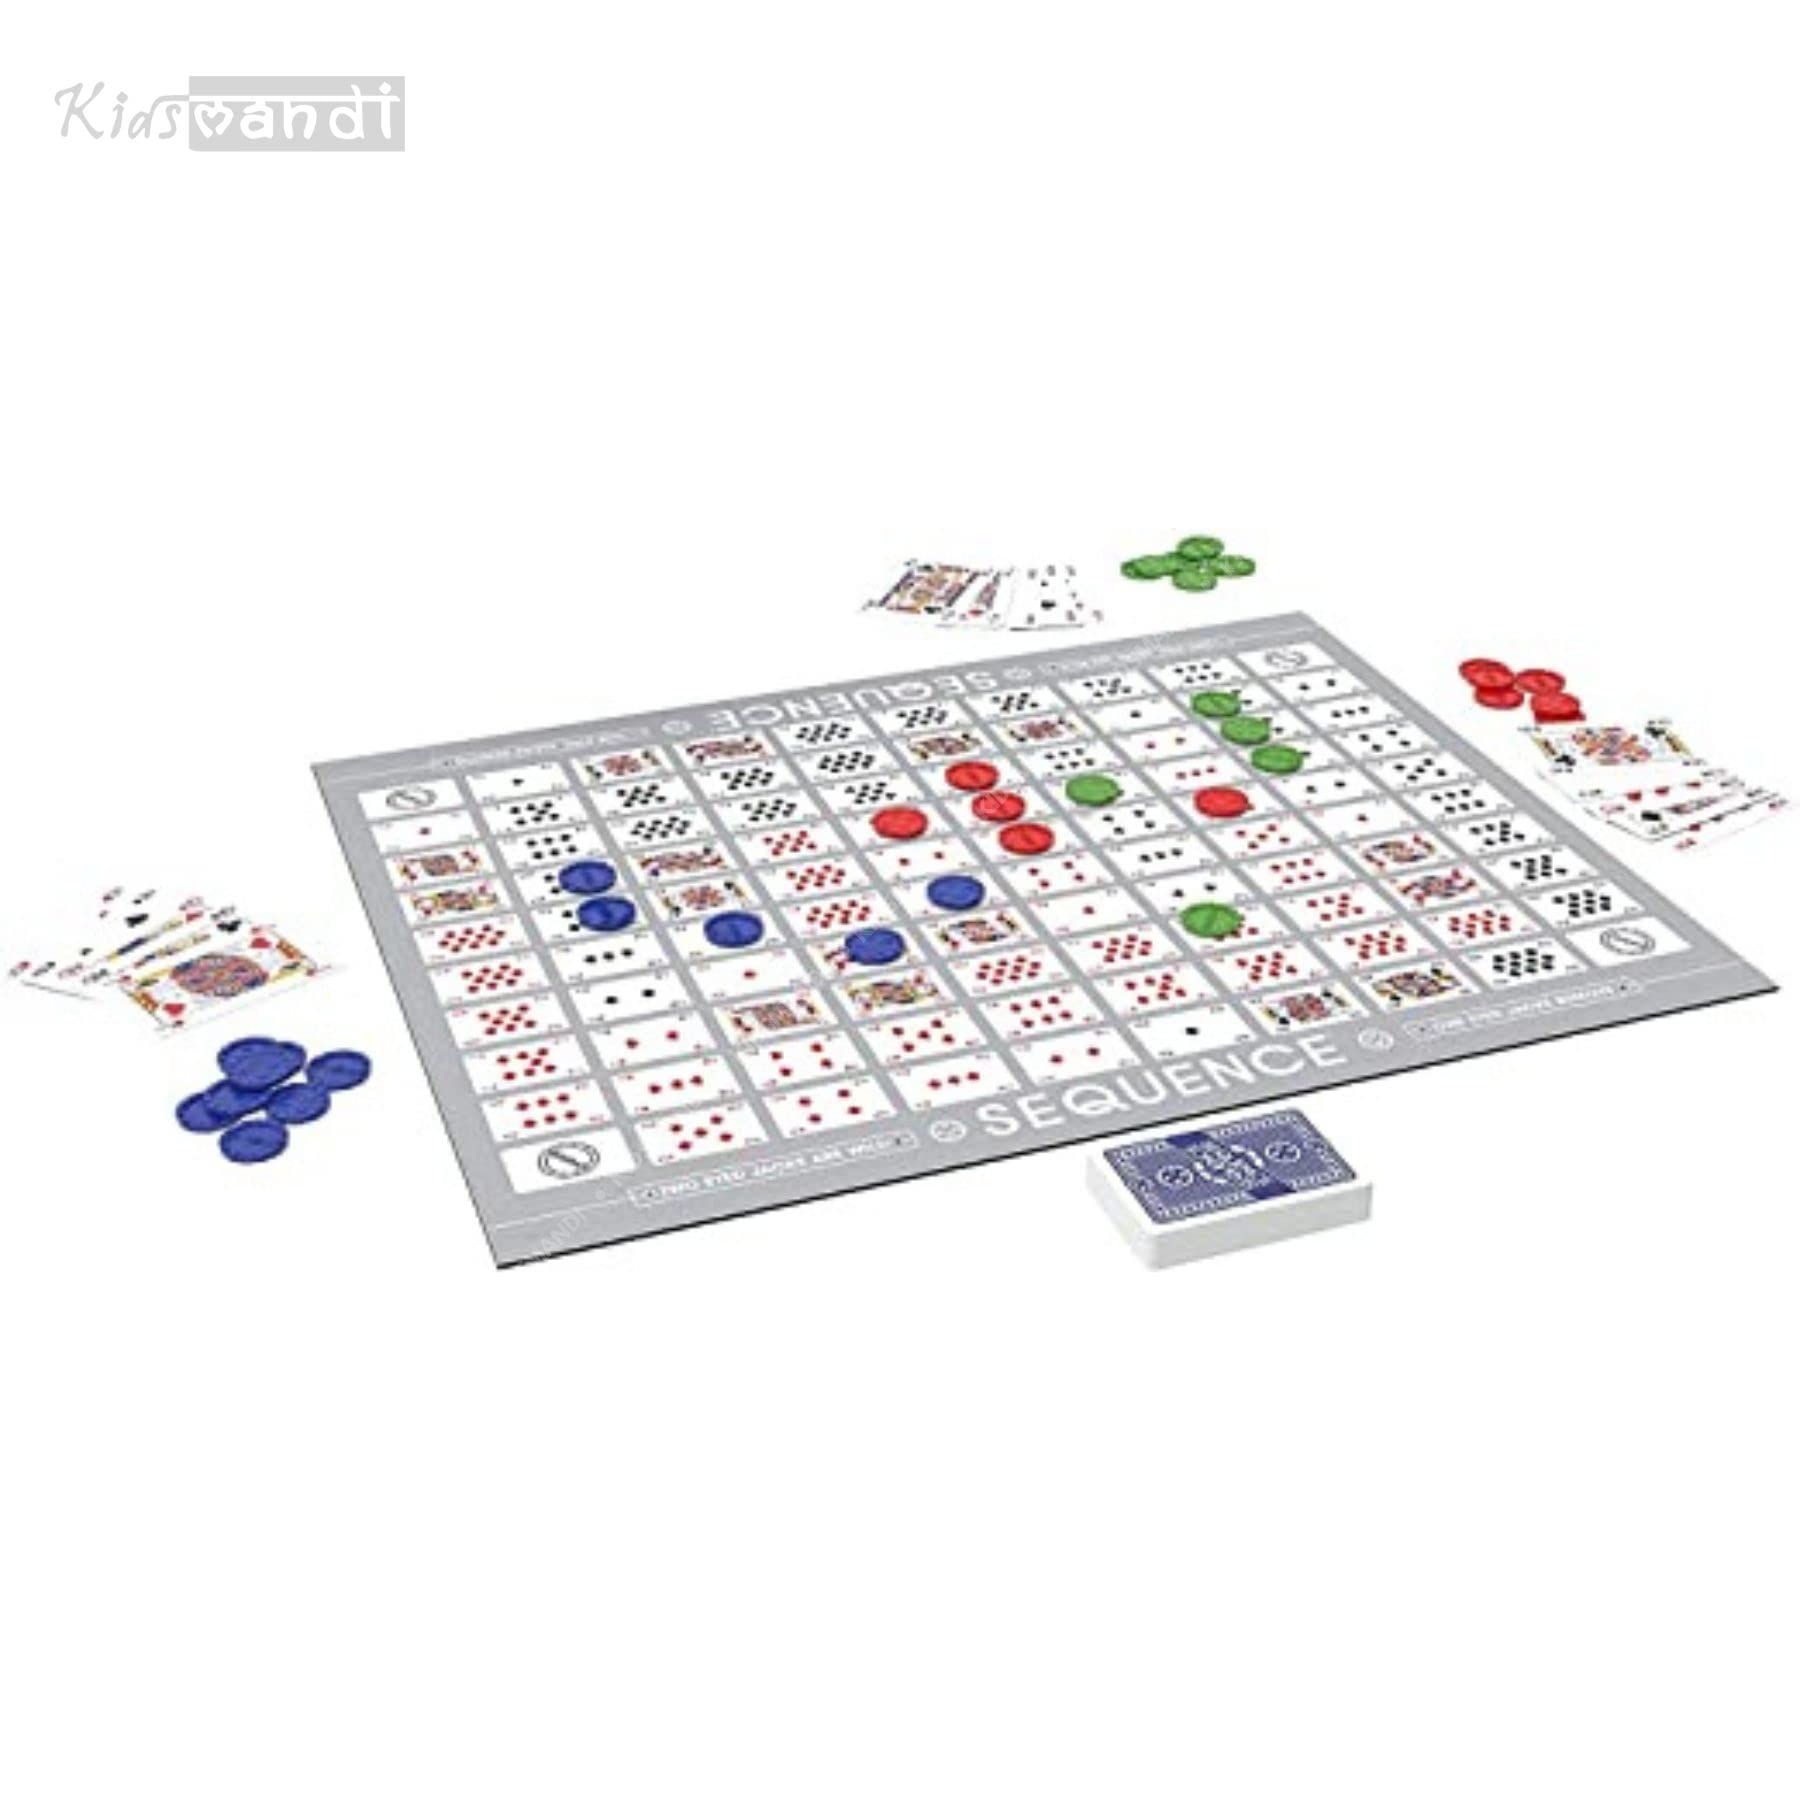 Kids Mandi Sequence Board Game: Fun and Educational Game for Kids.